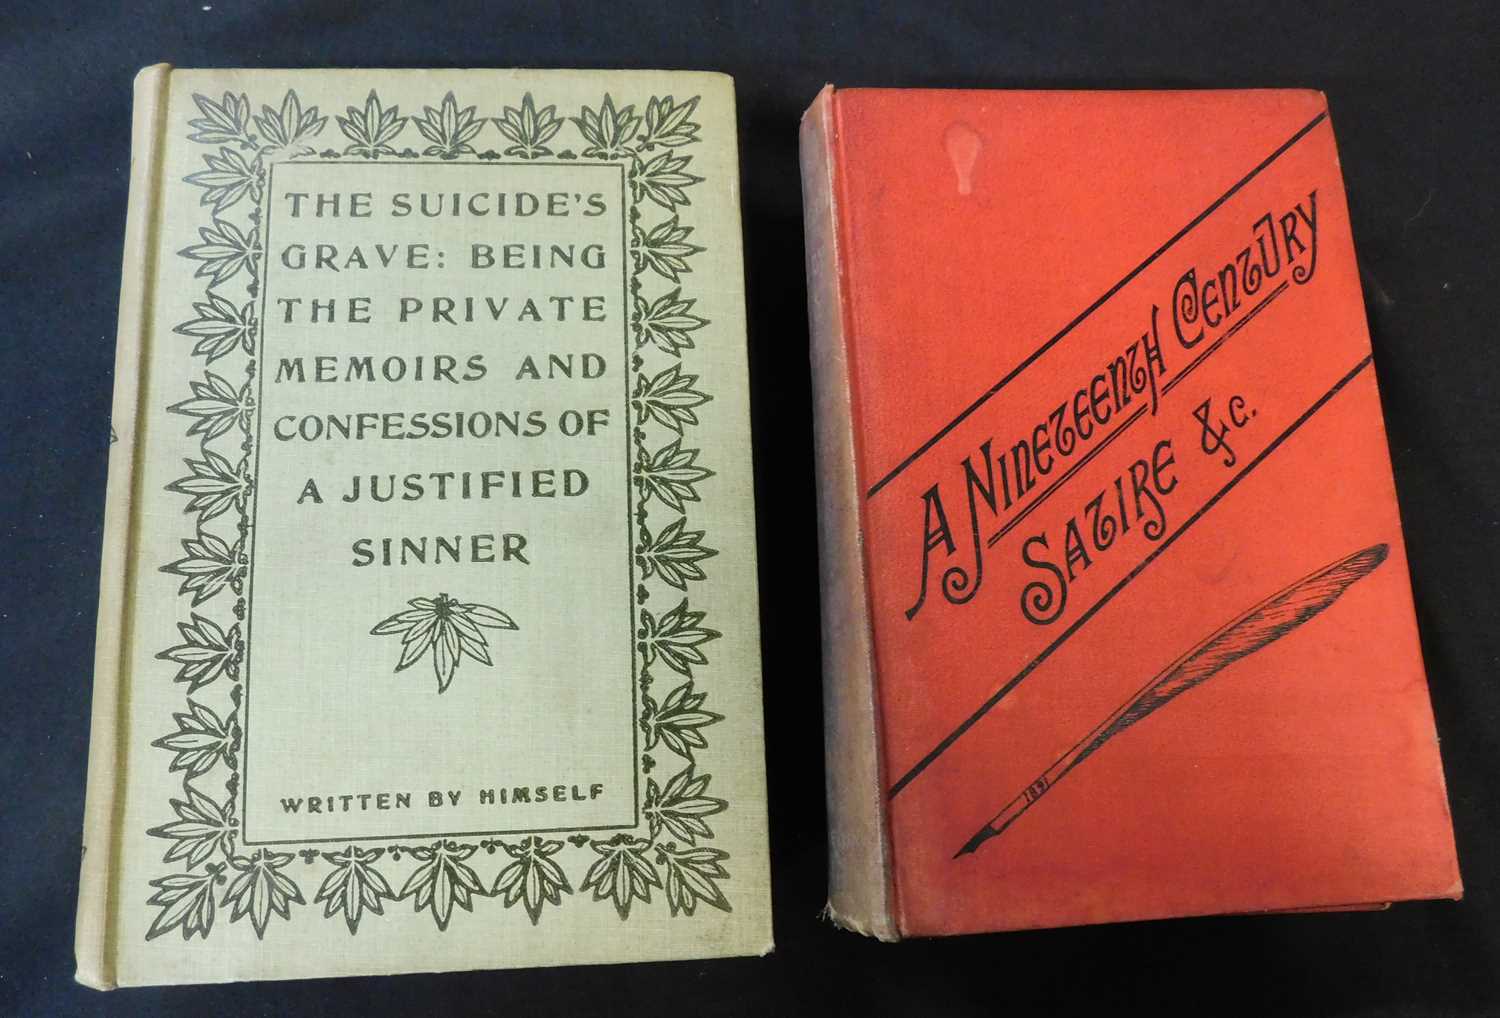 JAMES HOGG: THE SUICIDES GRAVE, BEING THE PRIVATE MEMOIRS AND CONFESSIONS OF A JUSTIFIED SINNER,